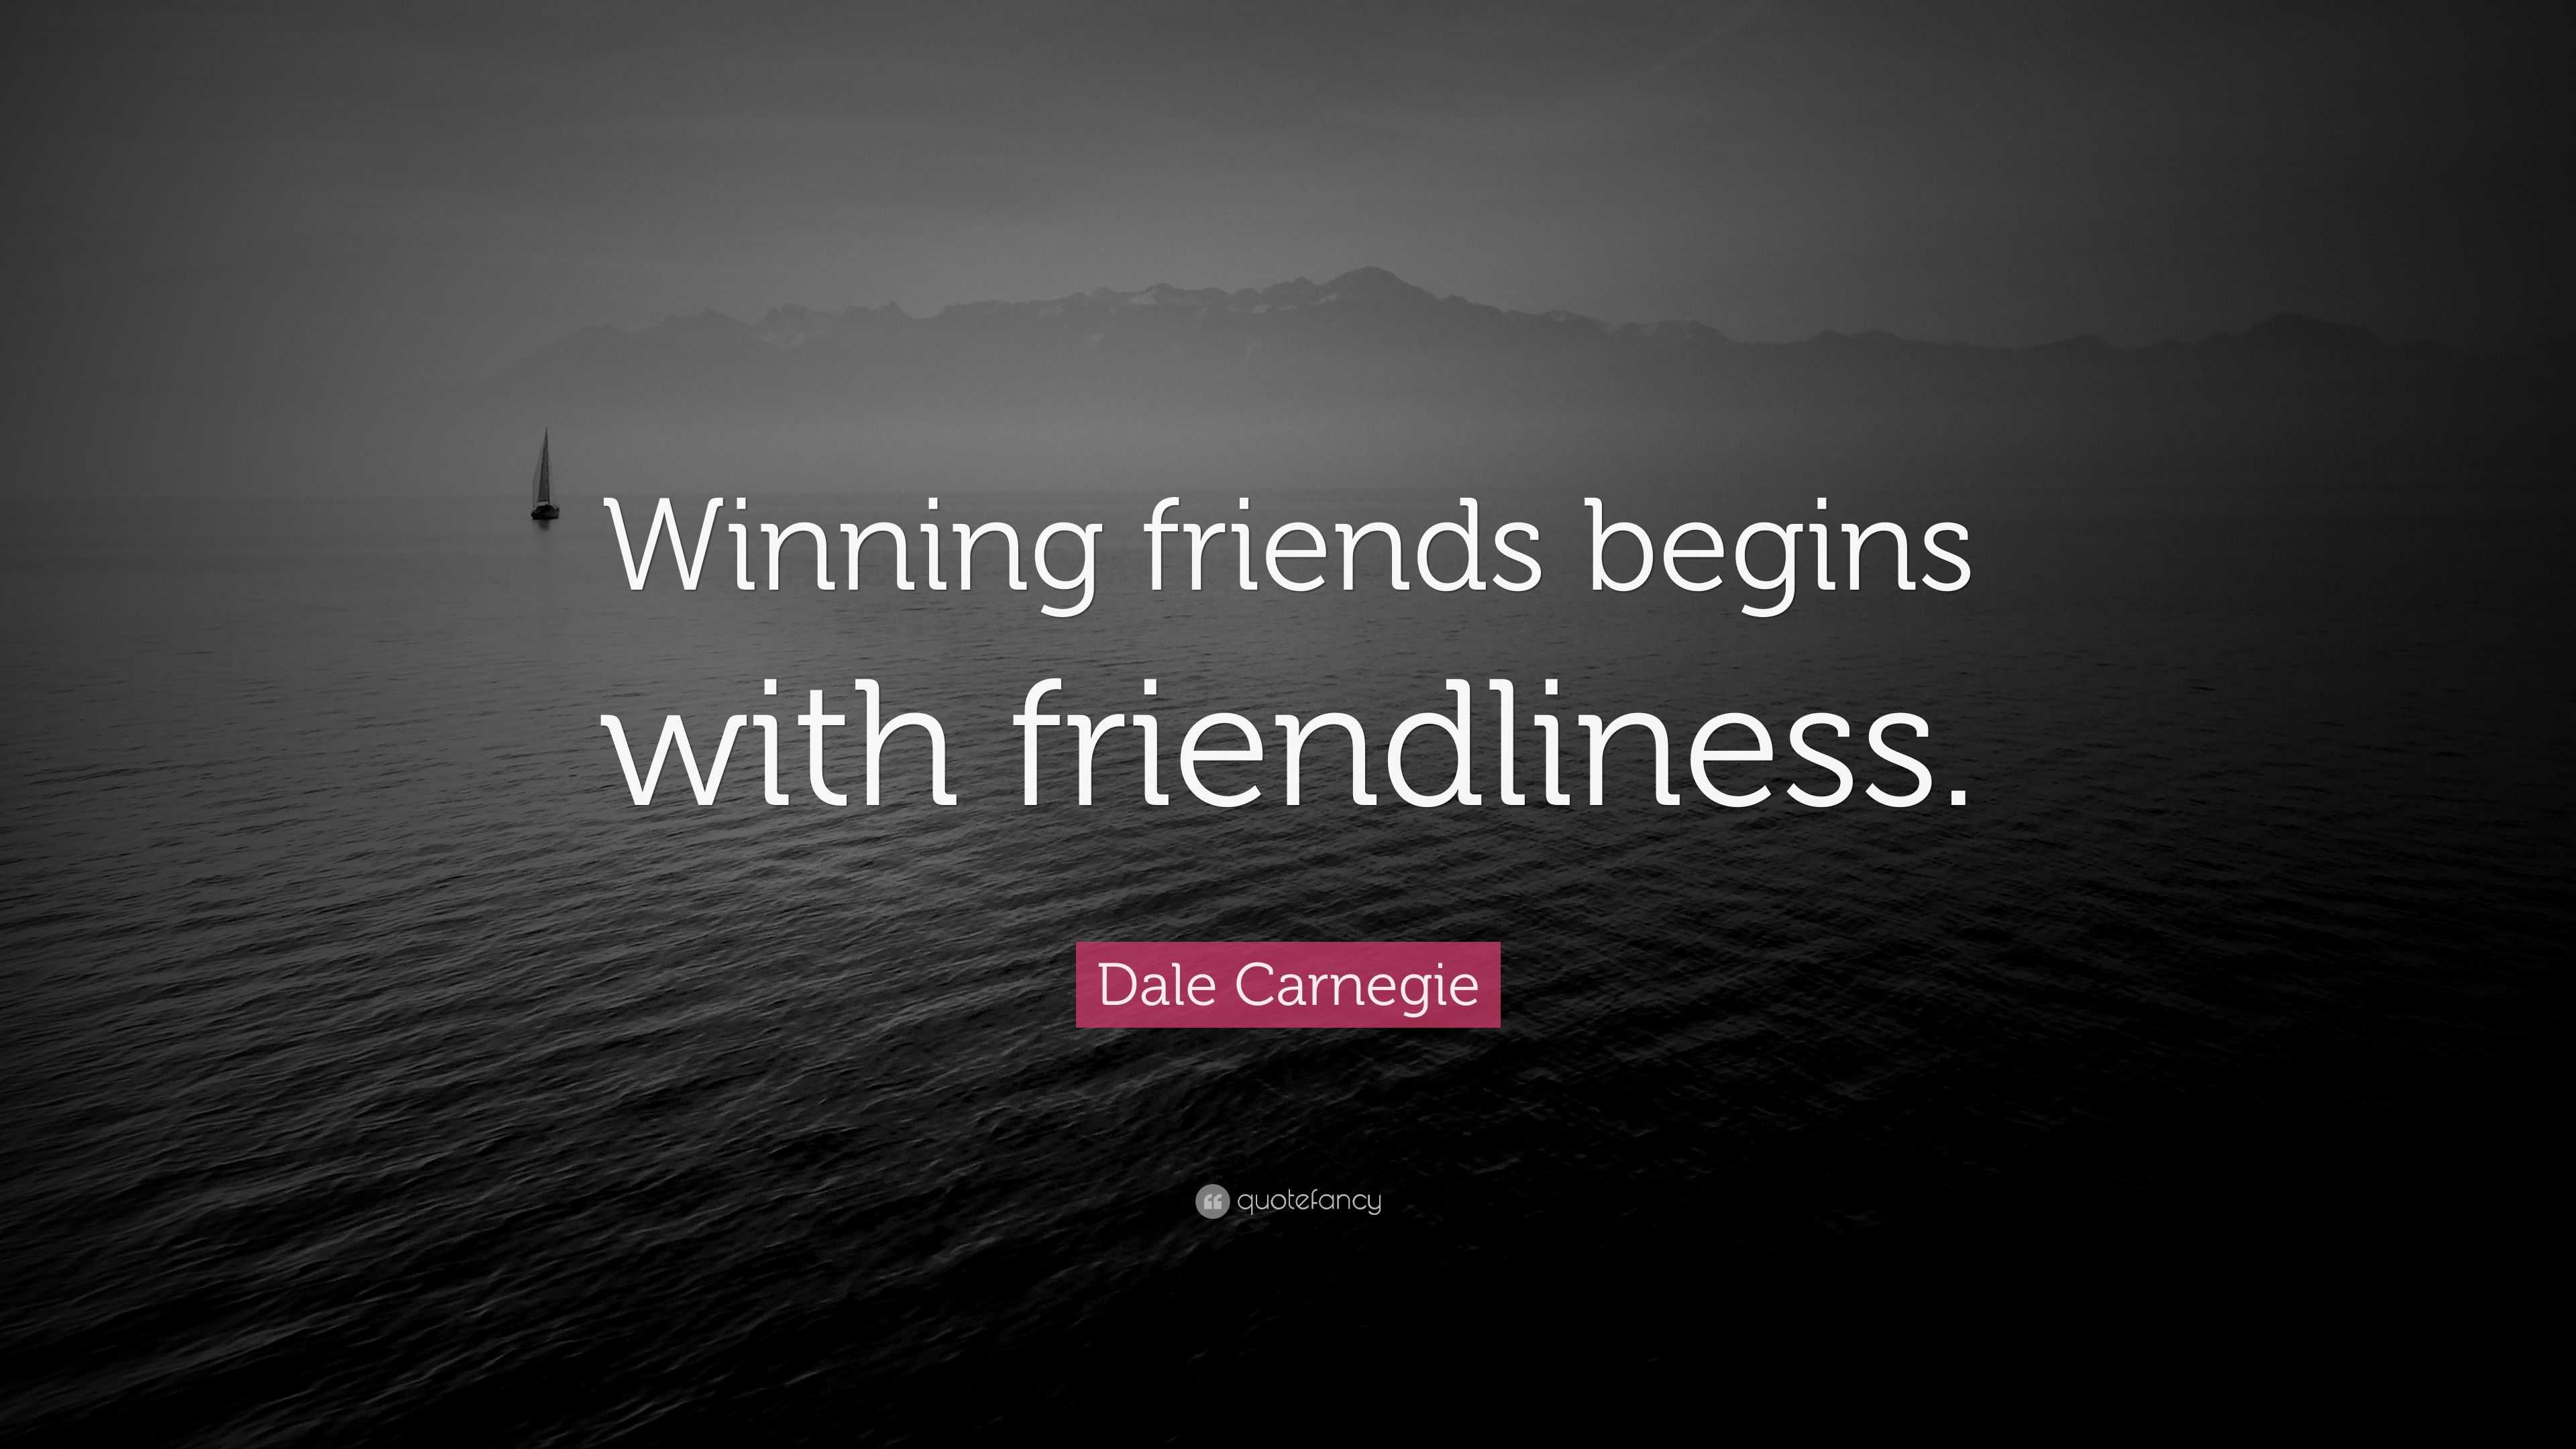 84 Dale Carnegie Quotes for Inspiration (WIN FRIENDS)